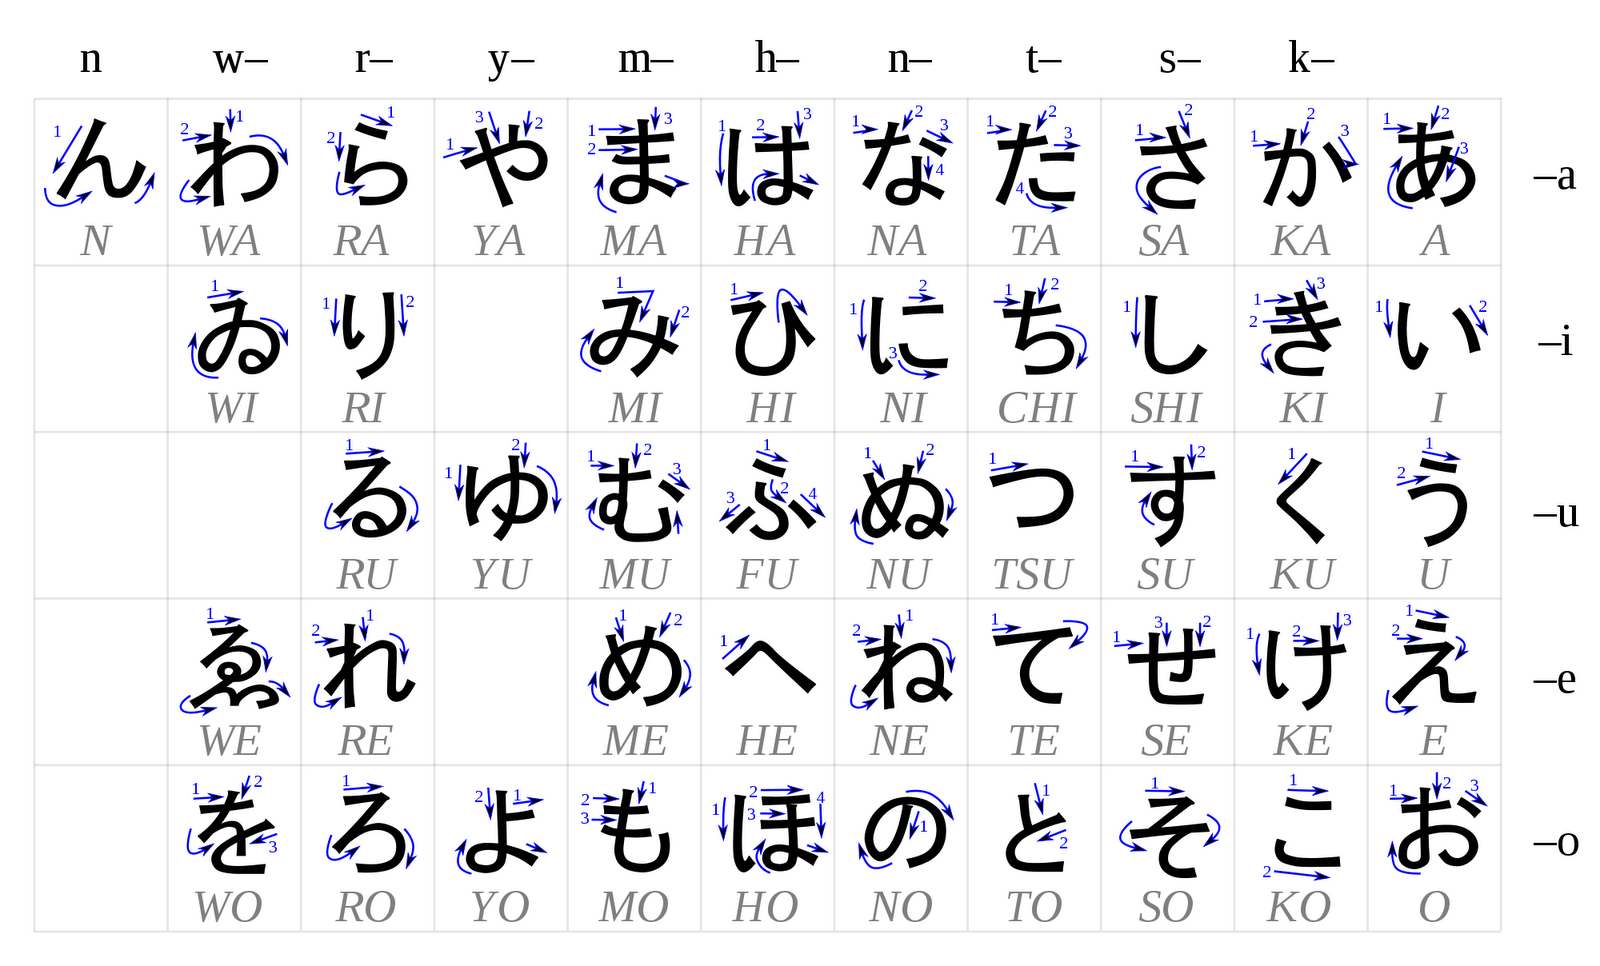 ... and katakana are very easy to learn you can learn them in 1 week